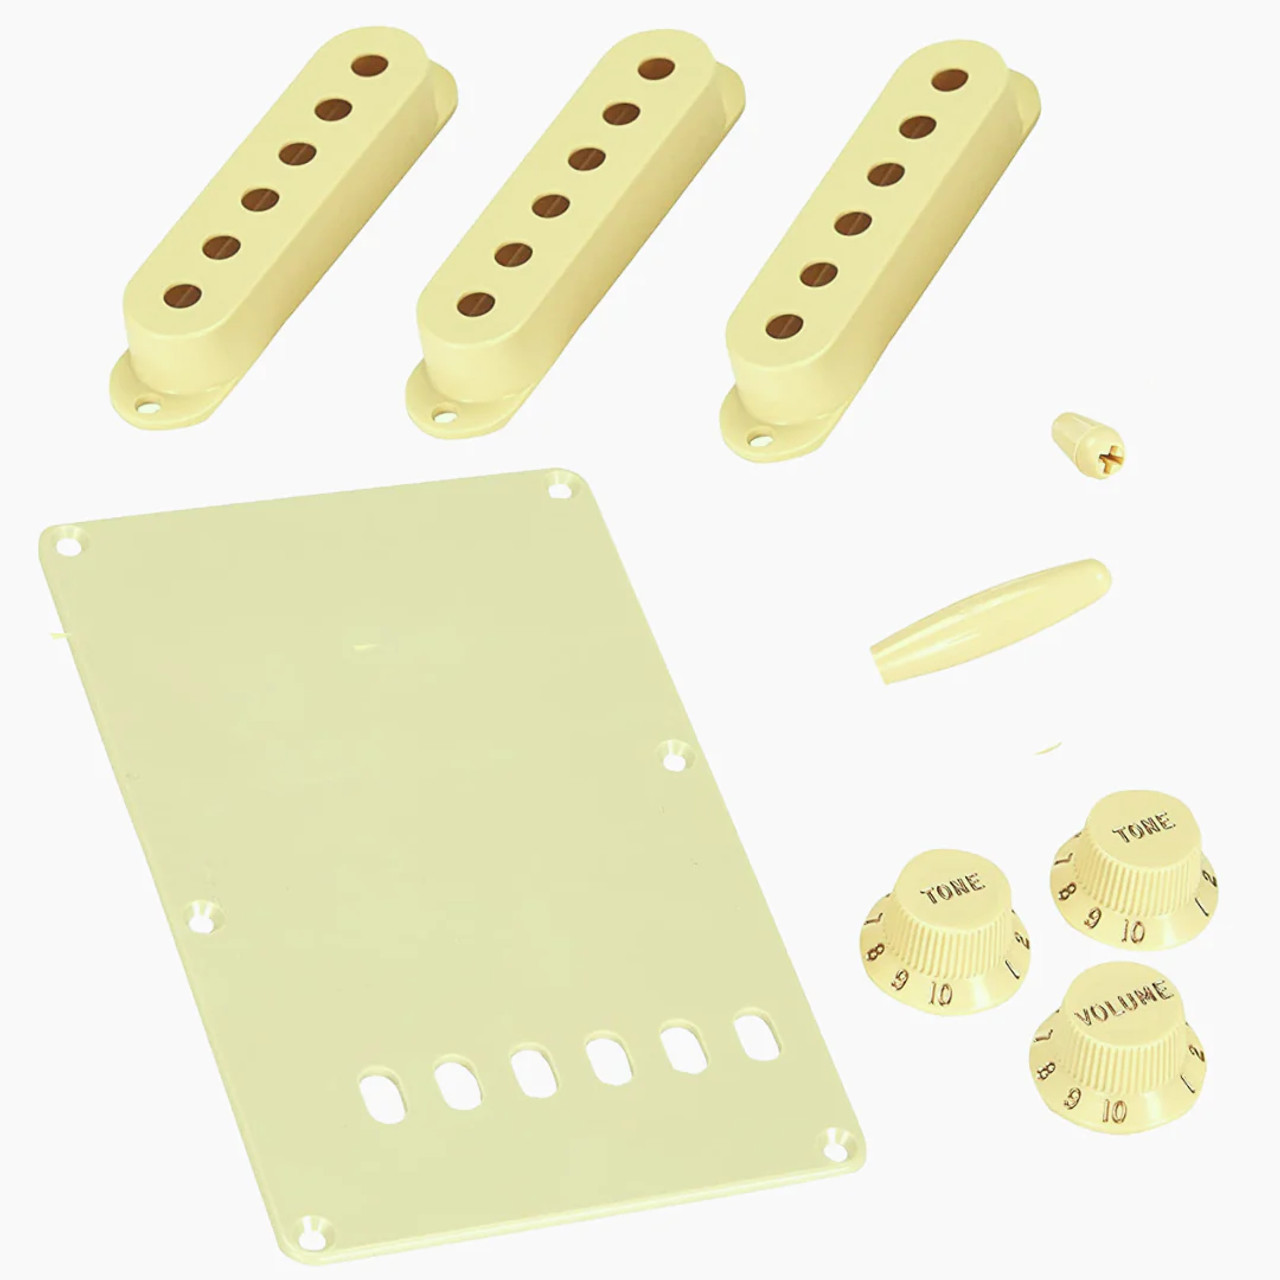 Mint Green Accessory Kit for Stratocaster